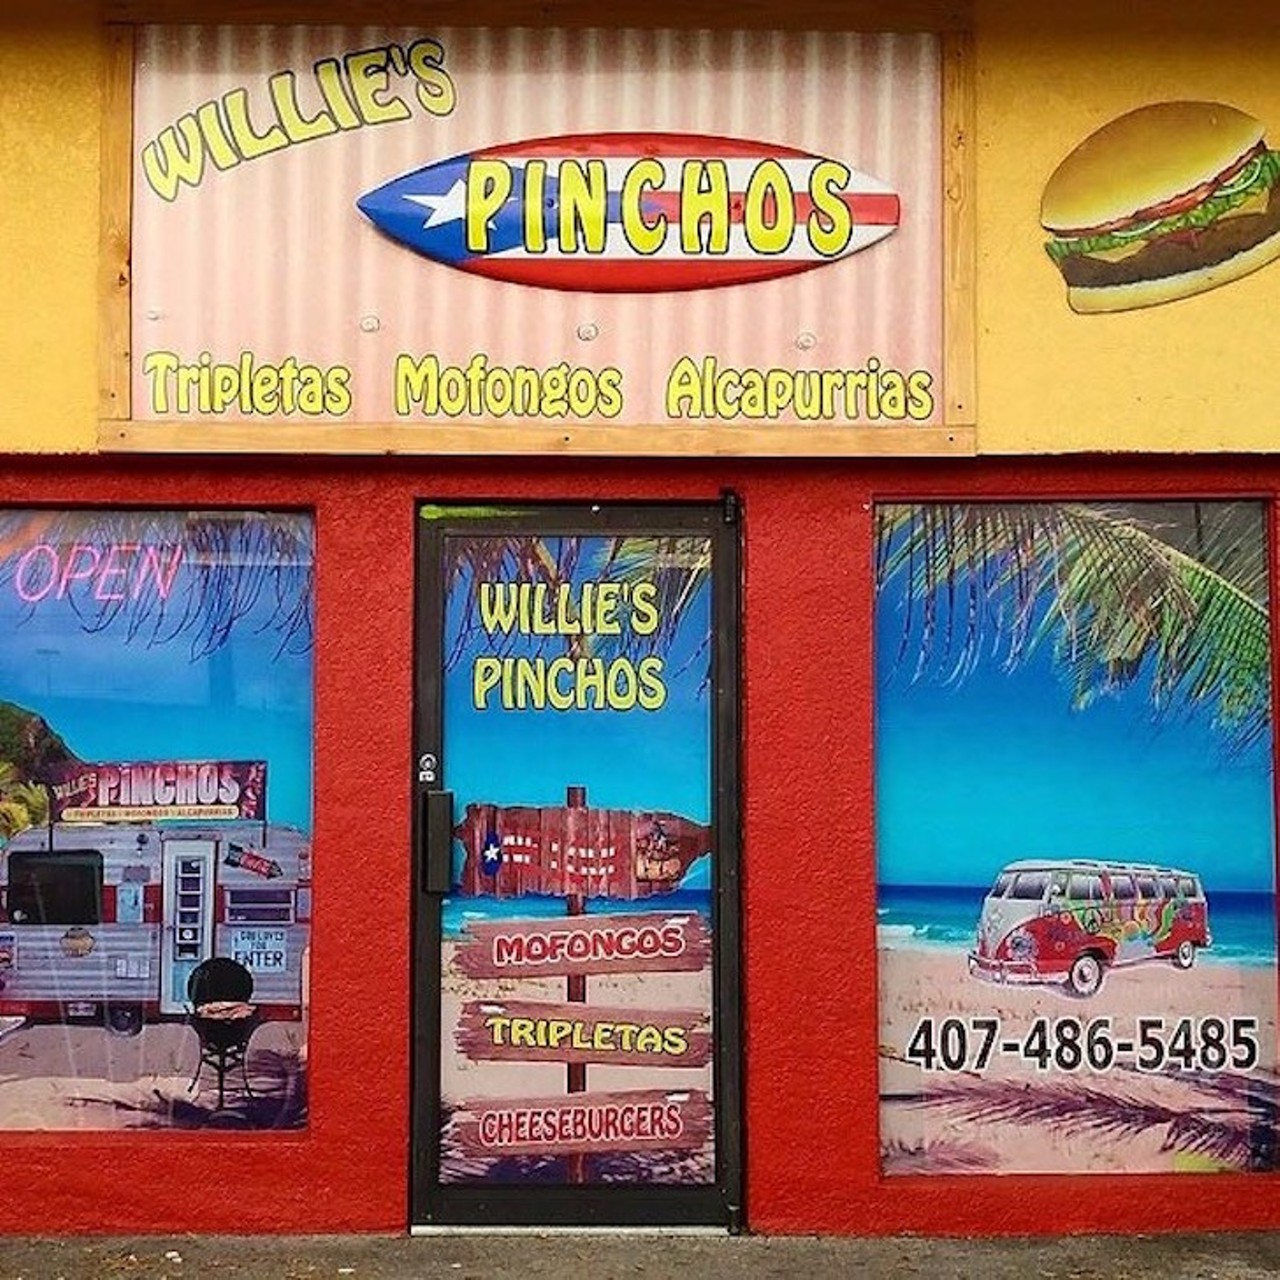 Willie&#146;s Pinchos Restaurant 
U.S. Territory: Puerto Rico  
1718 N. Goldenrod Road, 407-601-3373
Featured on Guy Fieri&#146;s Diners, Drive-ins, and Dives, Willie&#146;s Pinchos serves up hot, fresh Puerto Rican classics. Although there is usually a 15 or 20-minute wait, diners will vouch that the food is well worth it. Some of the options are the tripleta (a three-meat sandwich), the jibarito (a sandwich with flattened plantains instead of bread), and, of course, the pinchos (skewers). Willie&#146;s serves up $4 pi?a coladas, and the portions of food are generous, so order modestly. 
Photo via Willie's Pinchos/Facebook